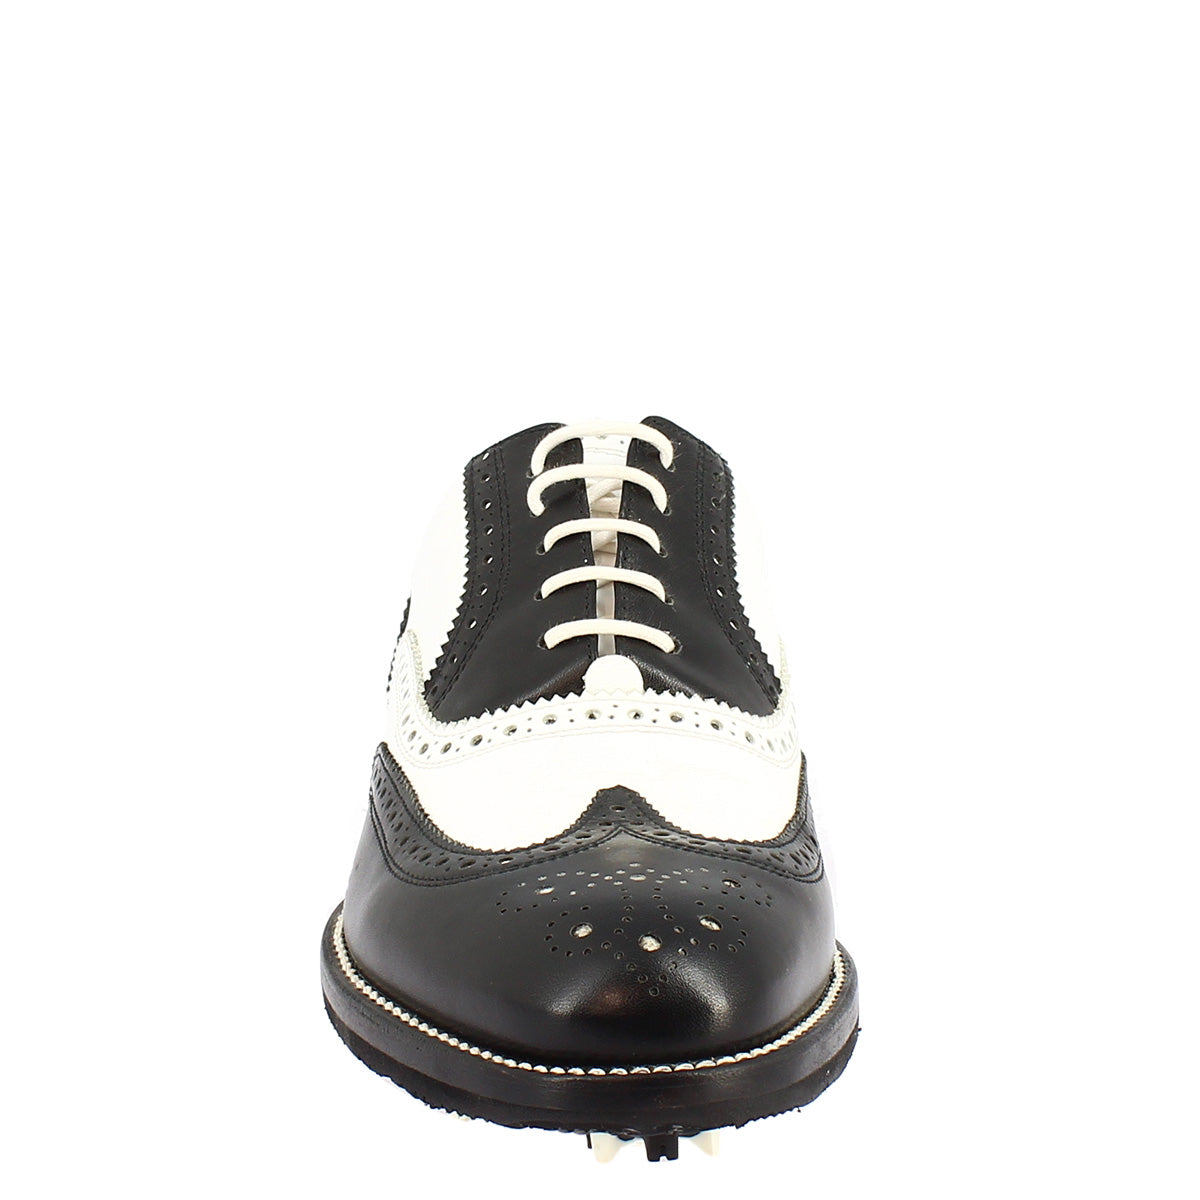 Two-tone black/white handcrafted leather golf shoes